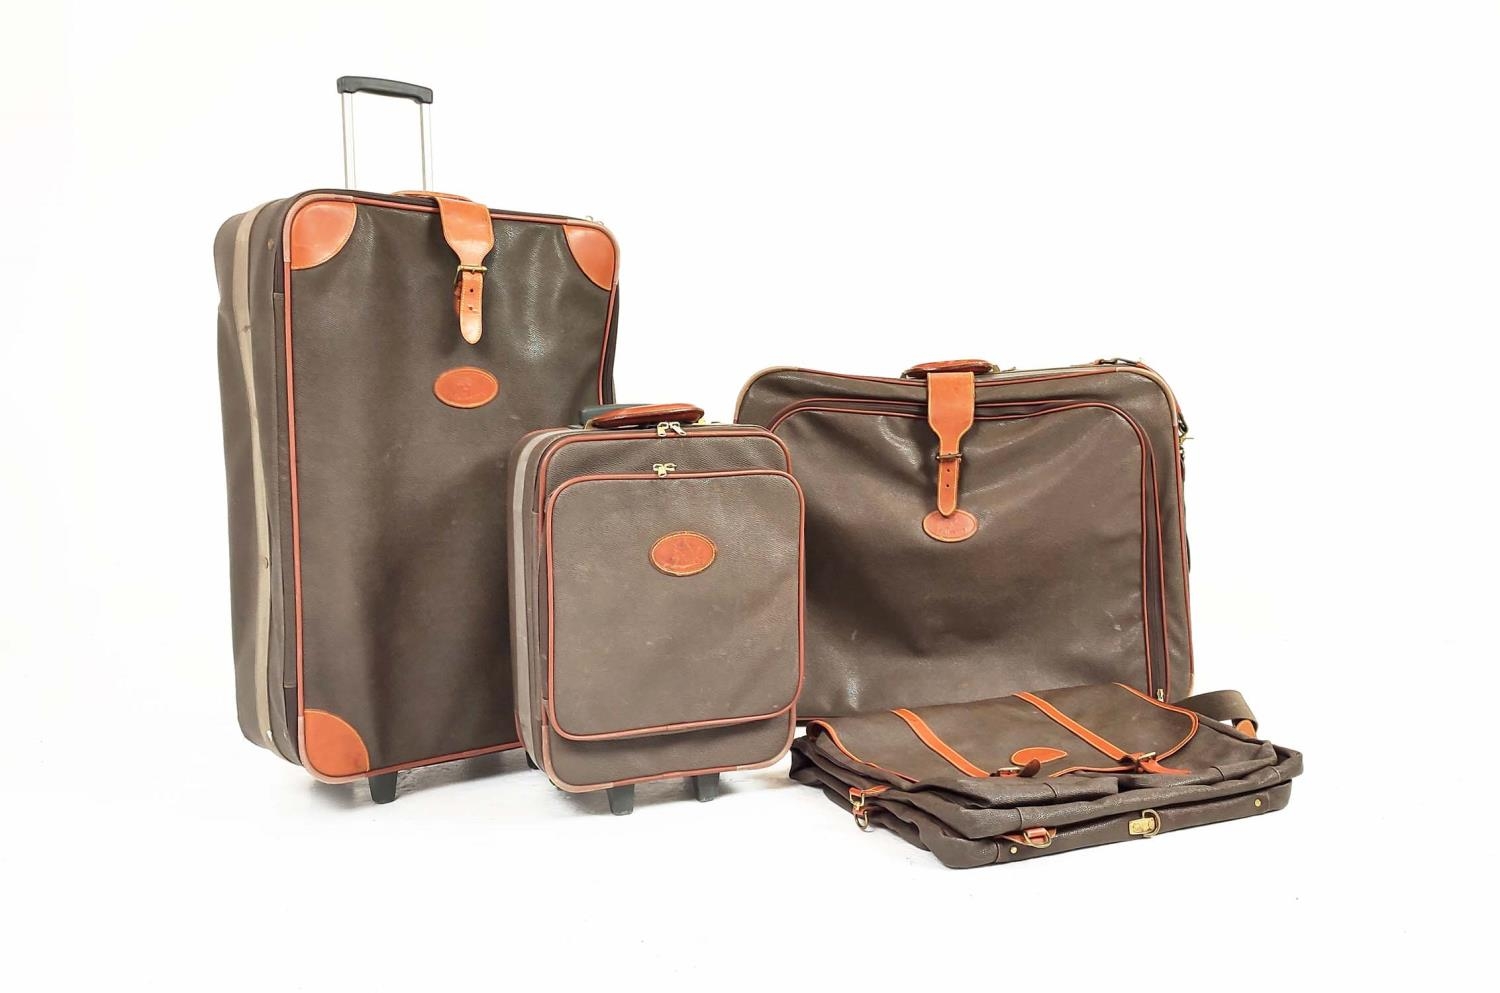 MULBERRY VINTAGE TRAVEL SET, scotchgrain with tan leather trims and handles, two trolleys, one